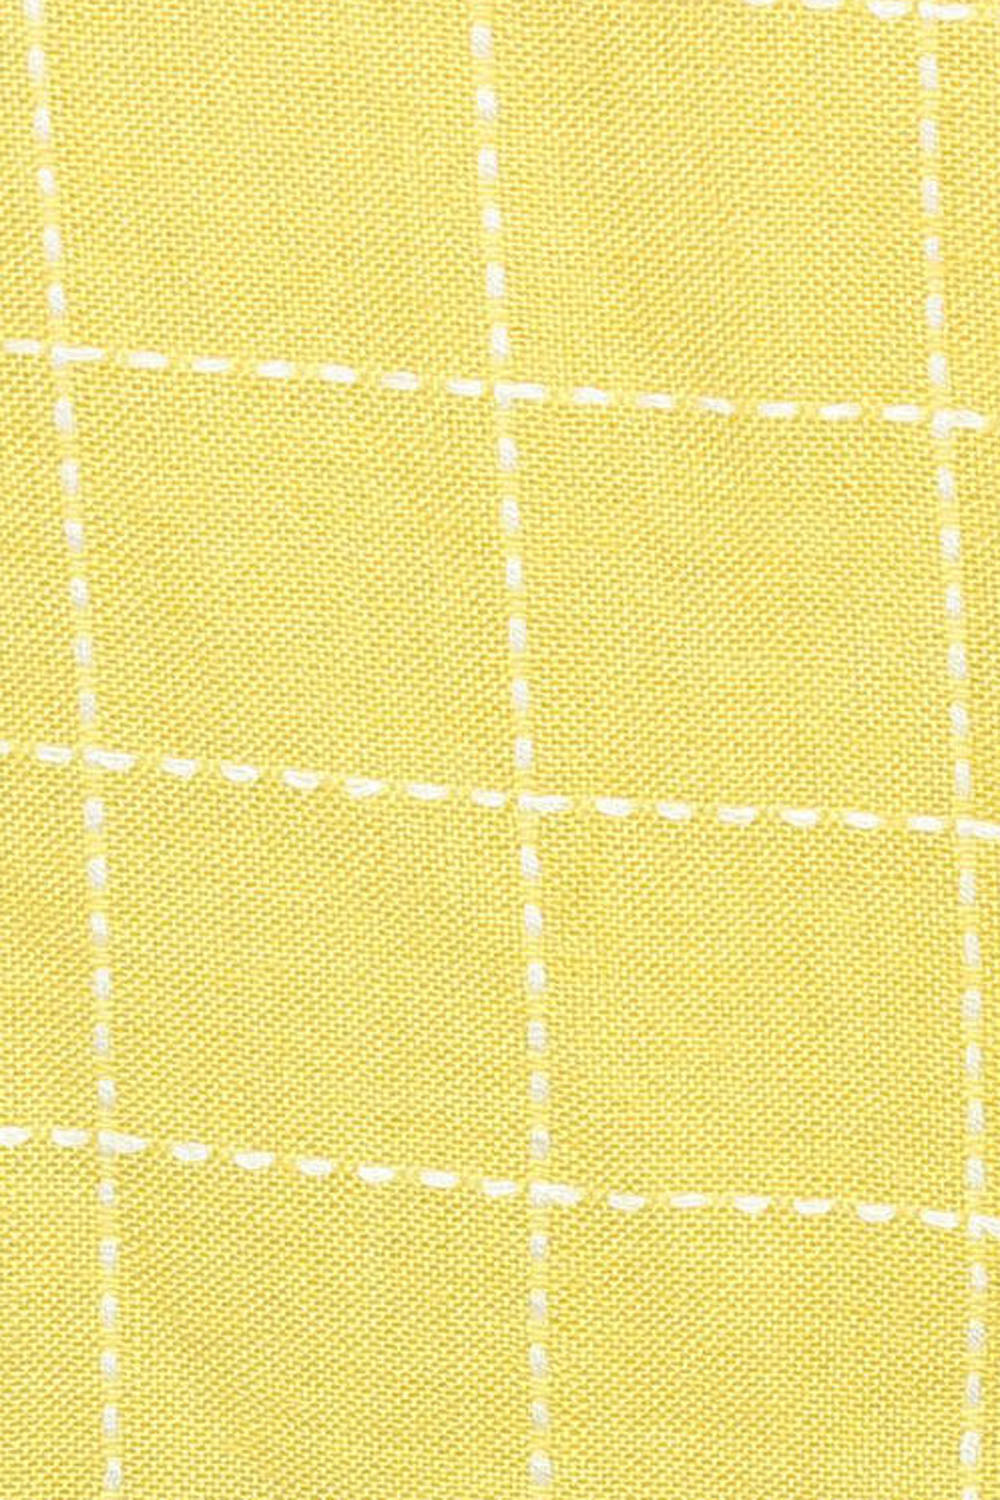 Viscose Scarves in Yellow And White